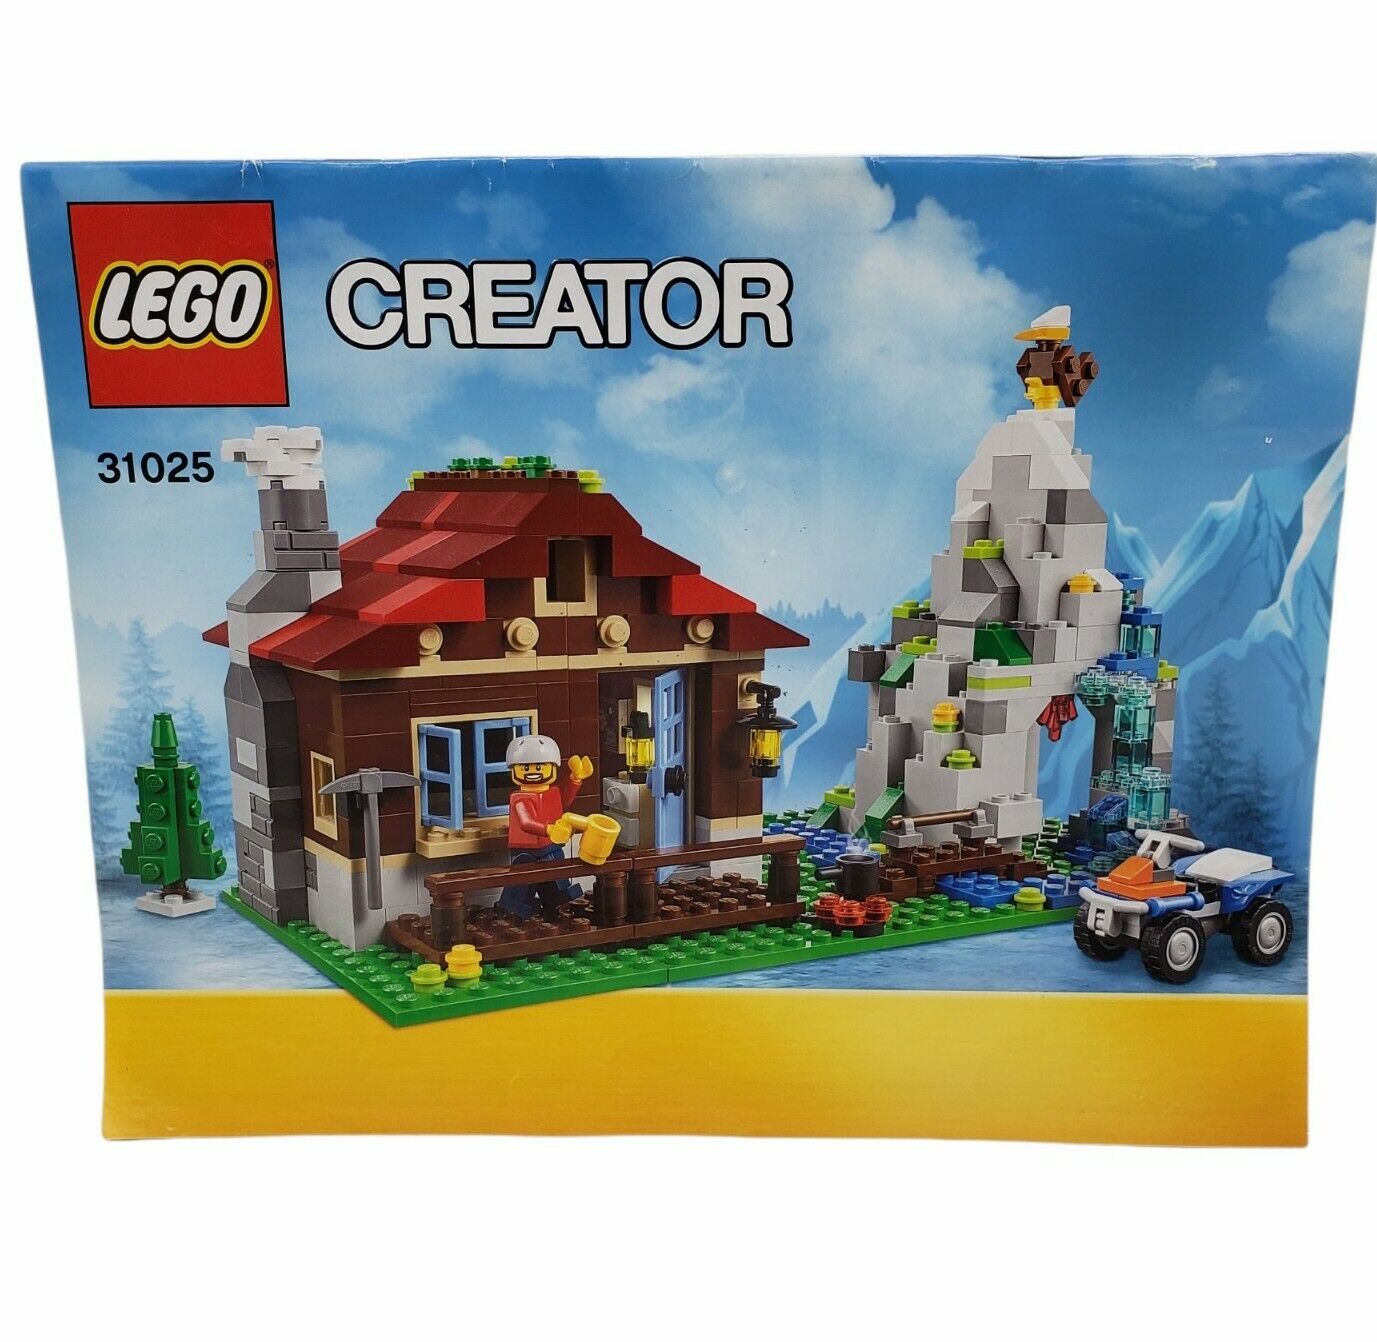 Lego Creator 31025 Replacement Instructional Manual, As Seen In Photo Only